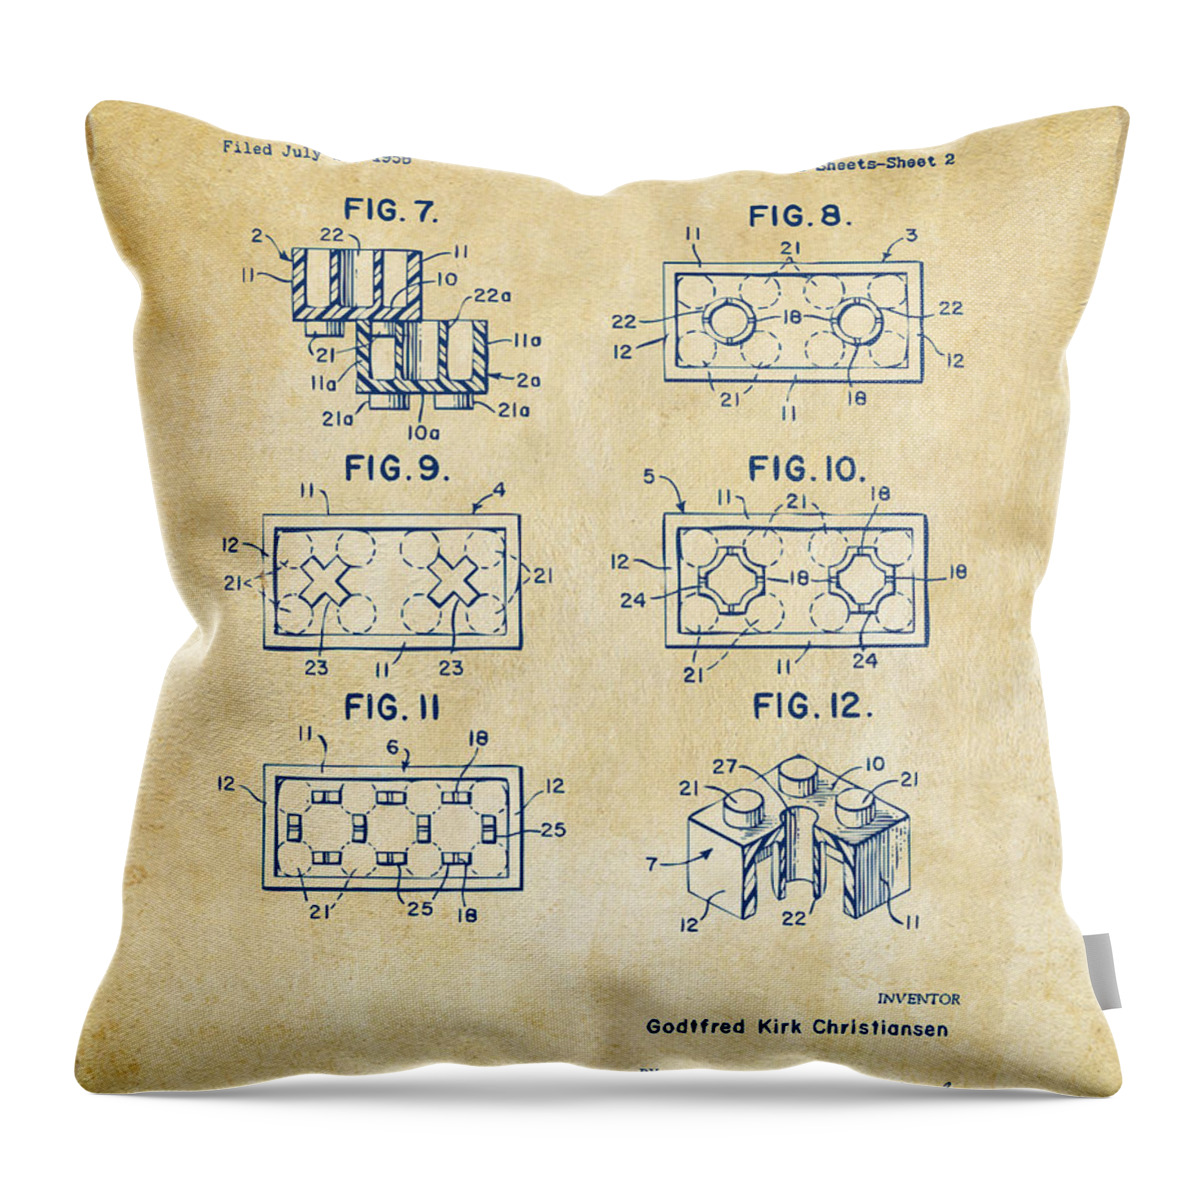 Toy Throw Pillow featuring the digital art Vintage 1961 LEGO Brick Patent Art by Nikki Marie Smith